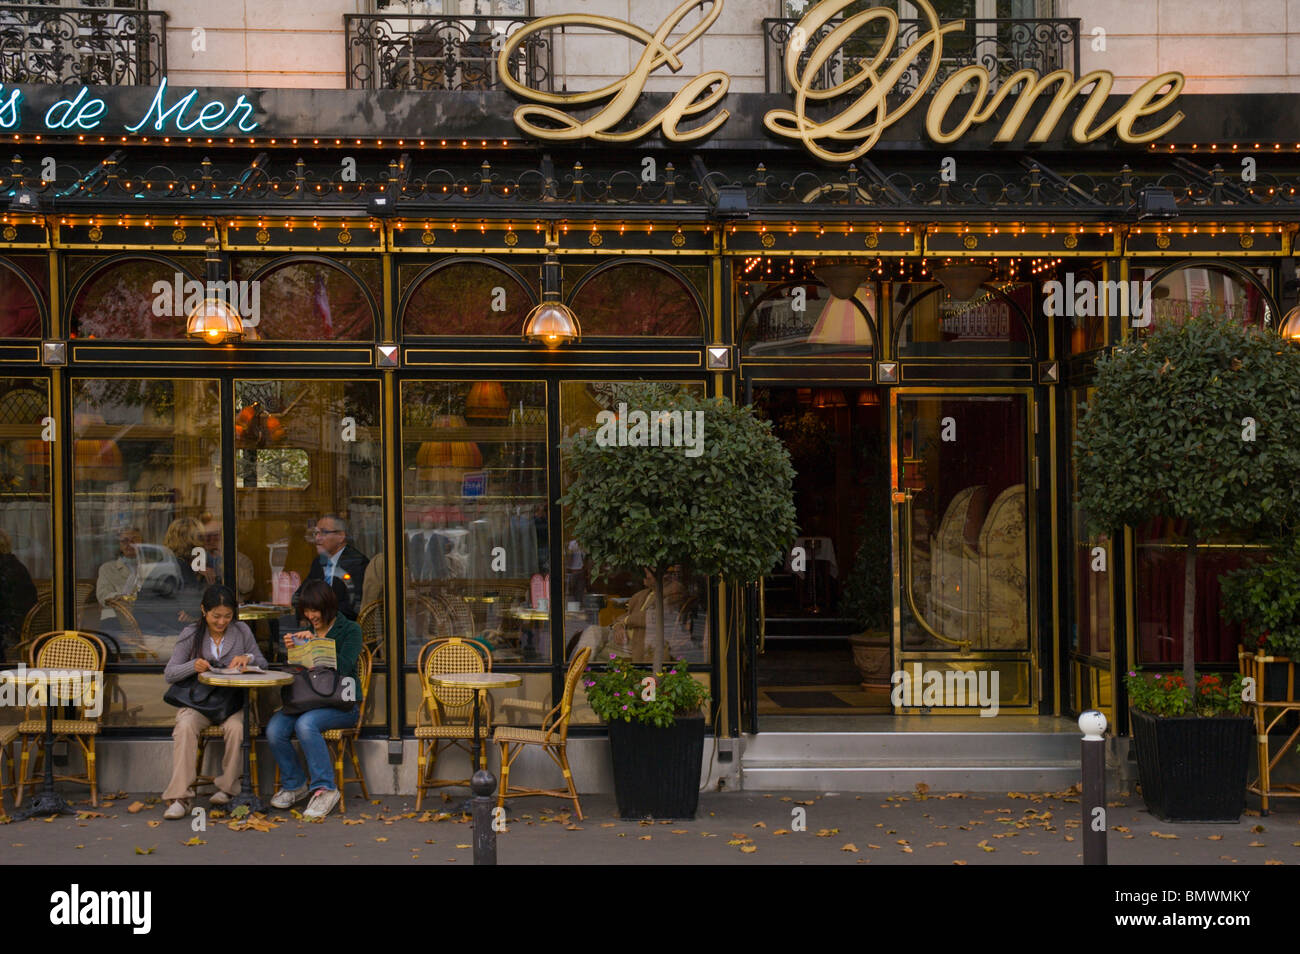 Le Dome cafe and seafood restaurant Montparnasse Paris France Europe Stock Photo